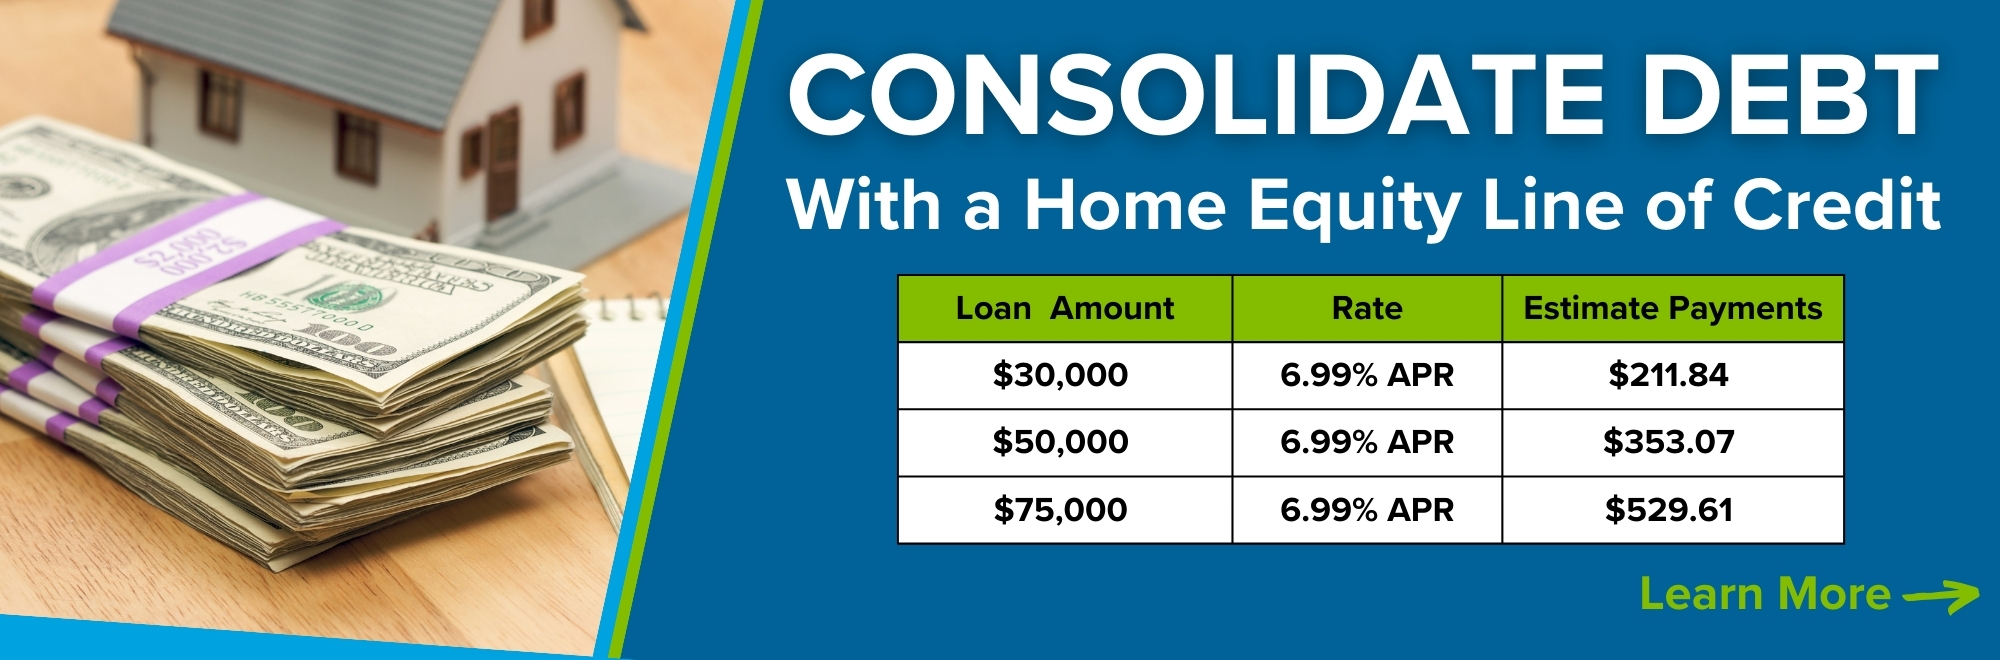 Consolidate debt with a home equity line of credit with fixed rates as low as 6.99% APR. Restrictions apply.